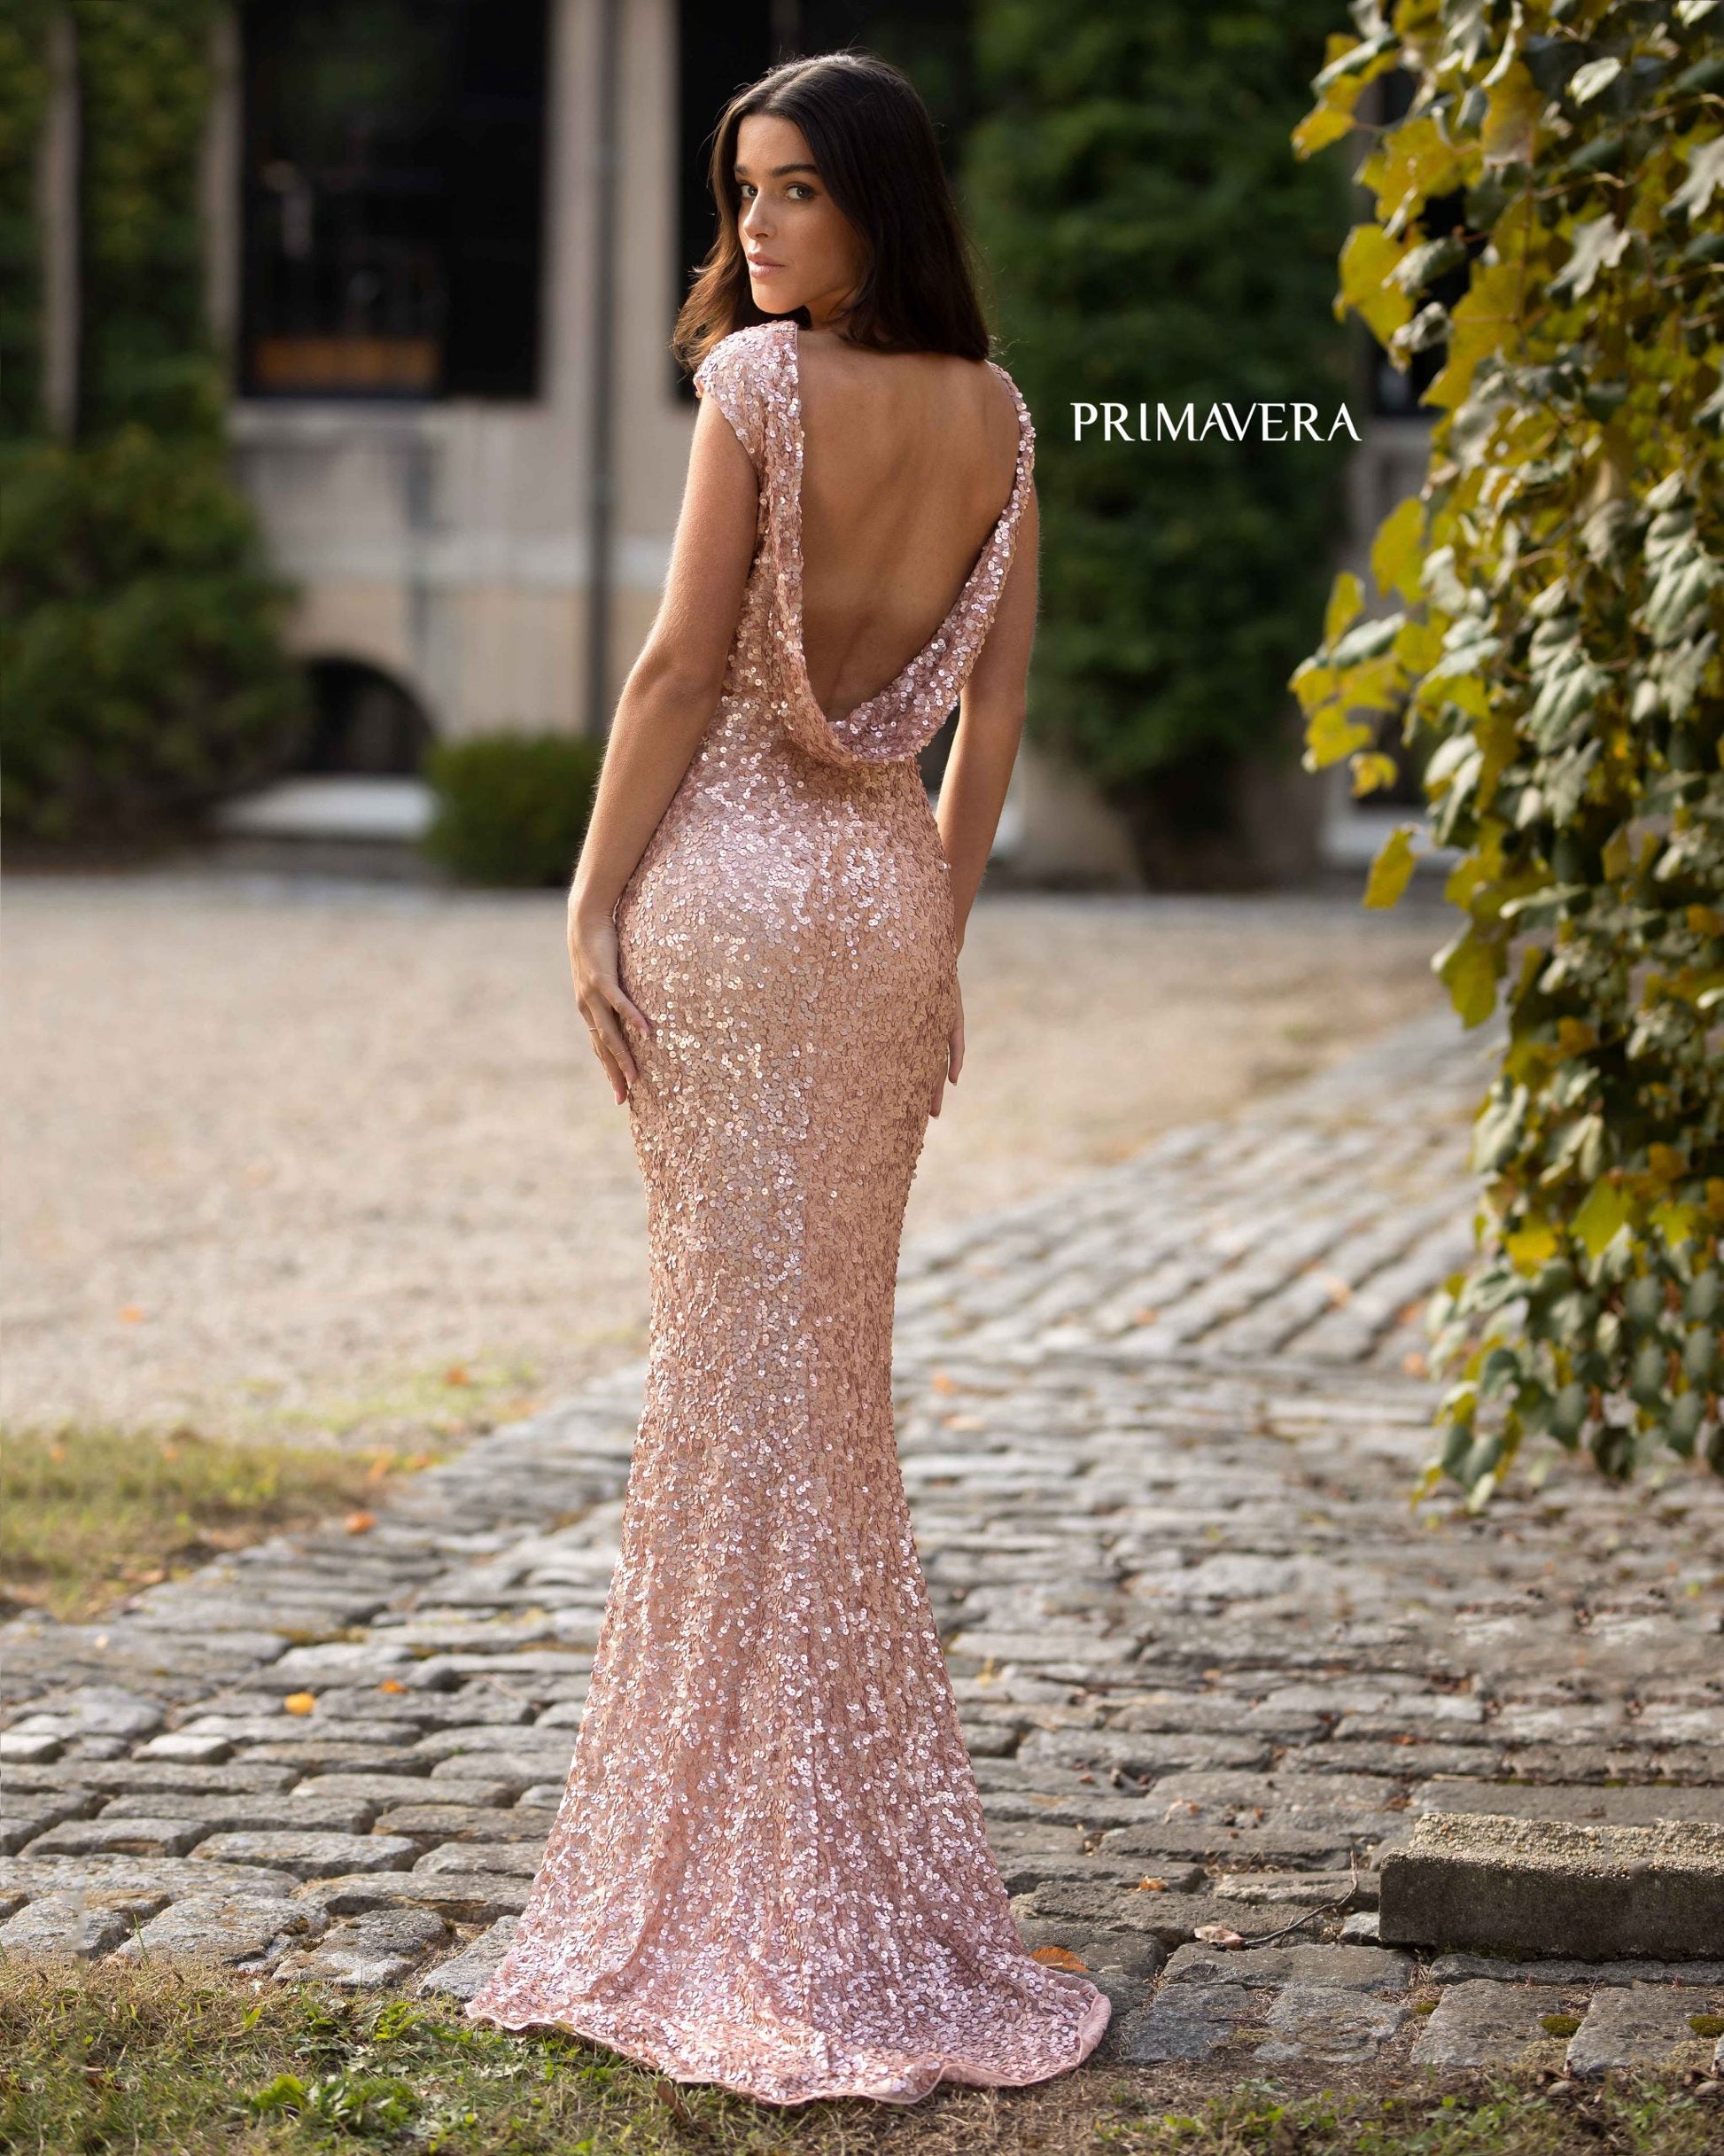 Primavera Couture 3796 This is a beautiful sequined formal evening dress.  The gown has a high neckline and cap sleeves.  The back drapes down to the lower back in a scoop fashion with layers of material that flows as you move.  It is floor length and has a small sweeping train. This is an excellent choice for bridesmaids, mother of the bride or a formal social event.  Available colors: Rose Gold Available sizes: 14